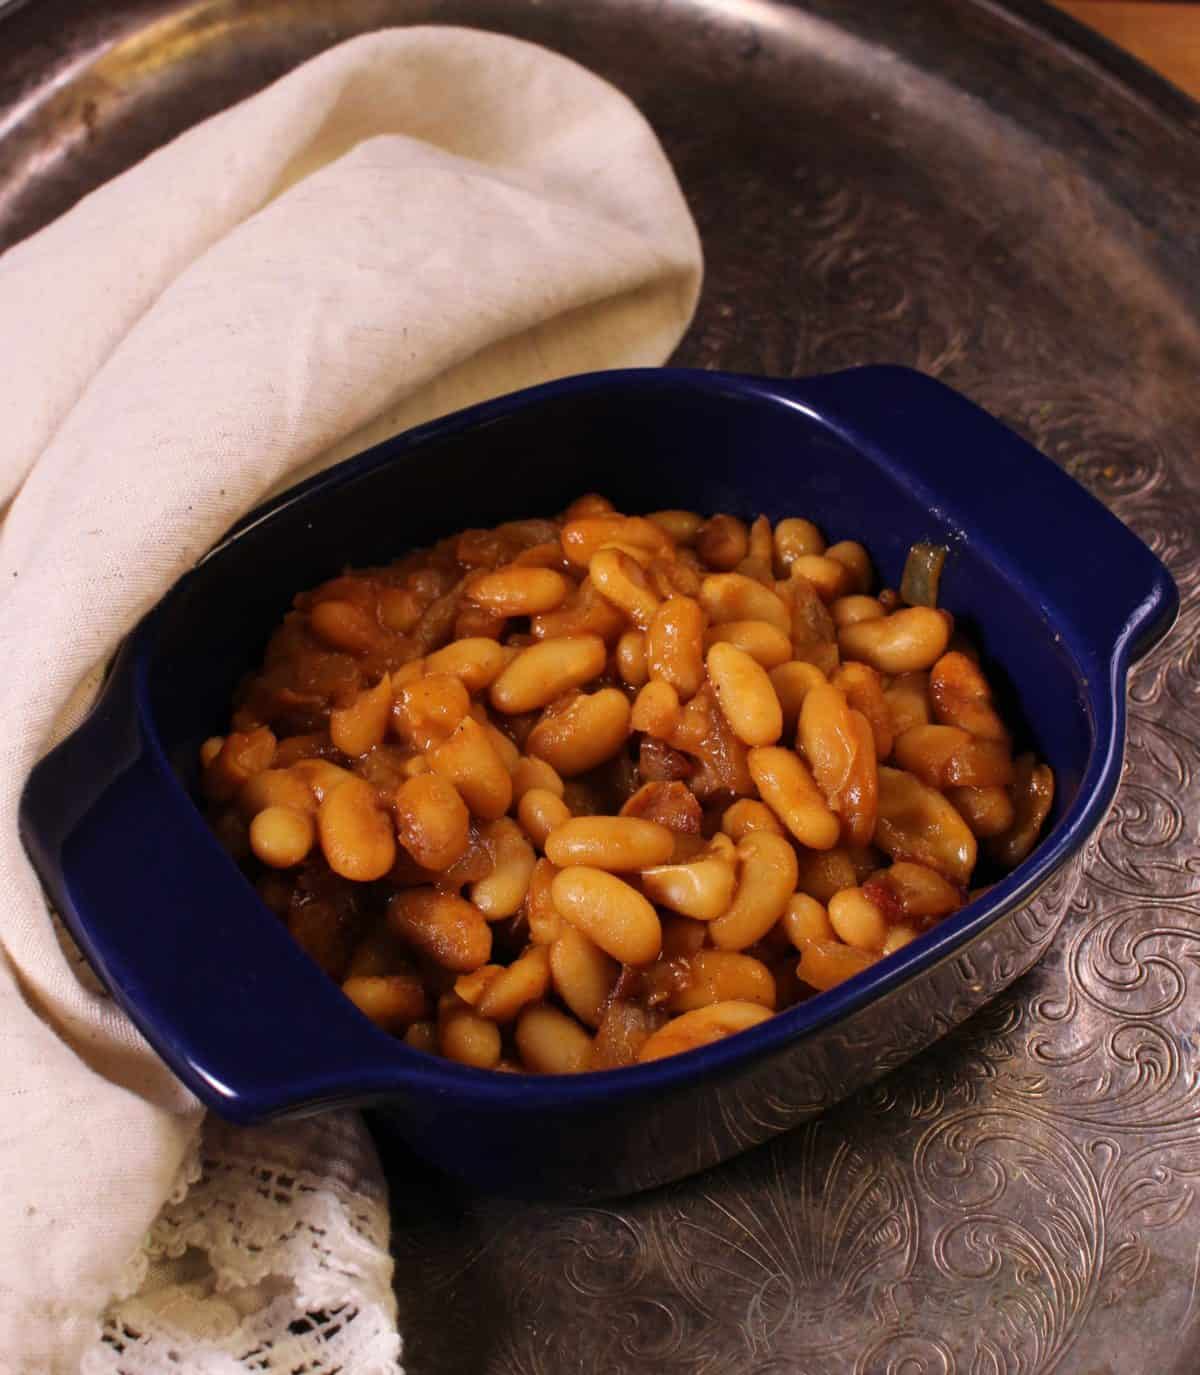 Baked beans in a small baking dish on a metal tray with a cream-colored cloth napkin